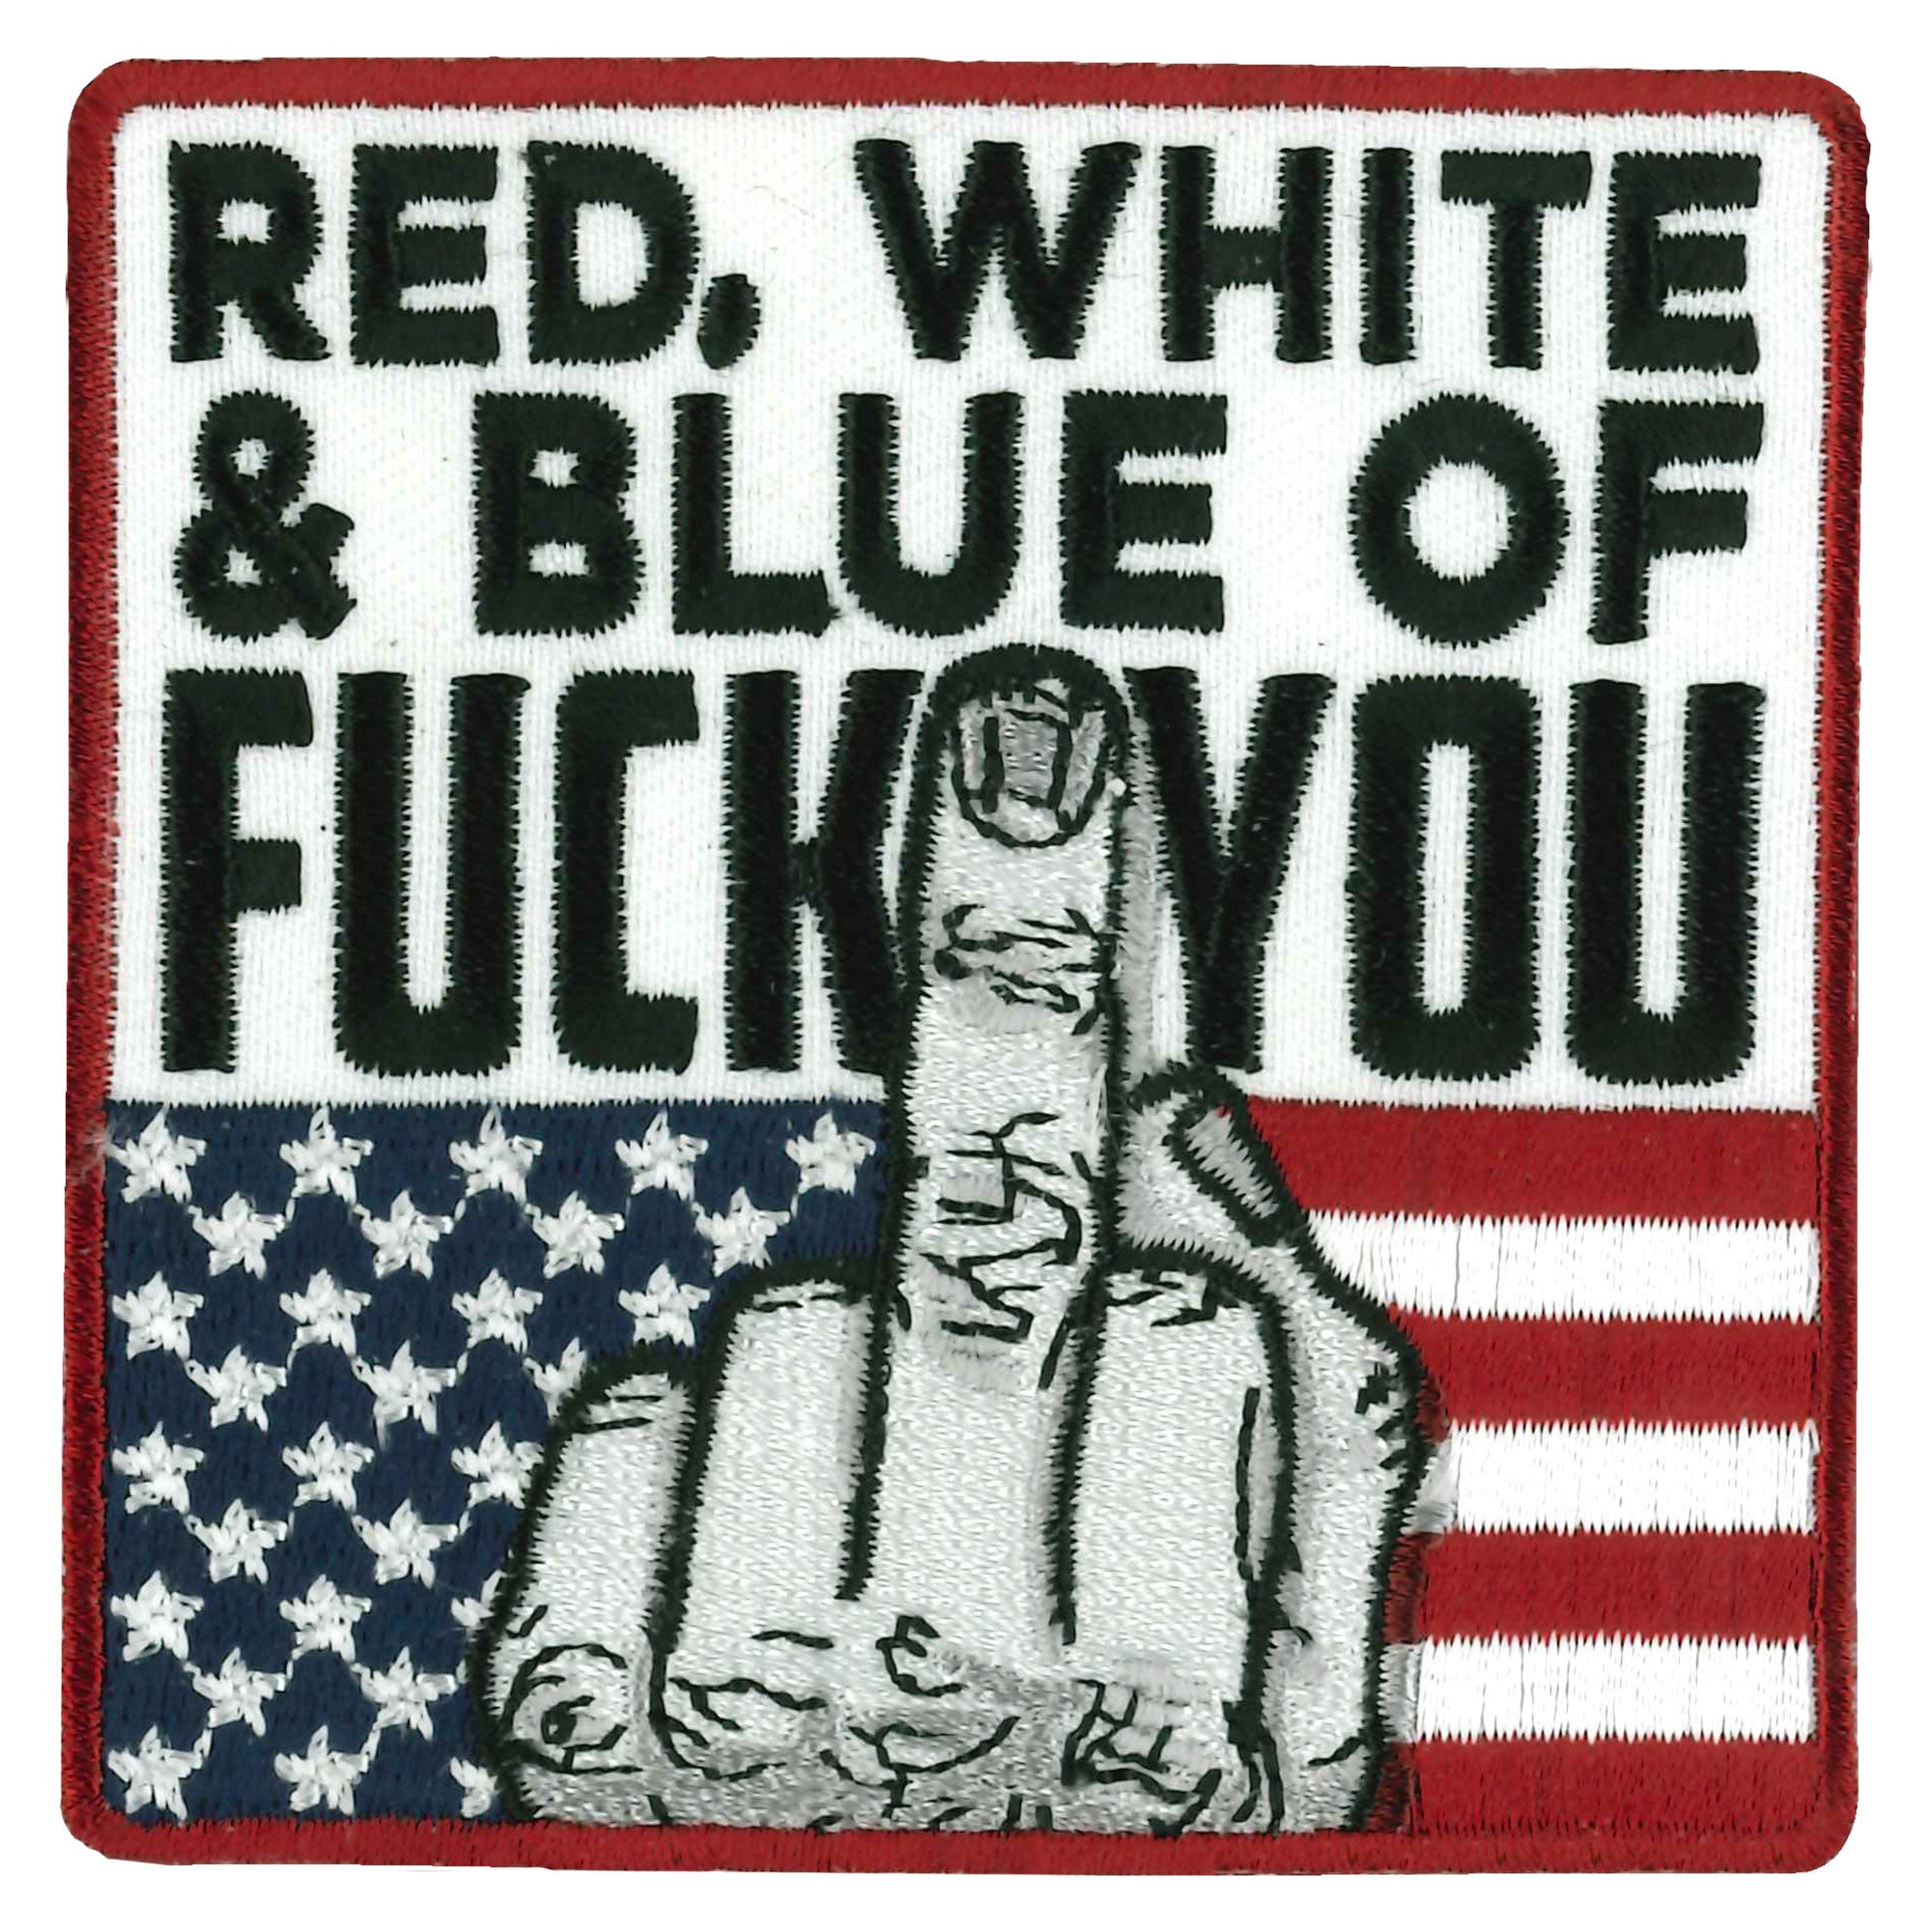 Hot Leathers Red White and Blue 3" X 3" Patch